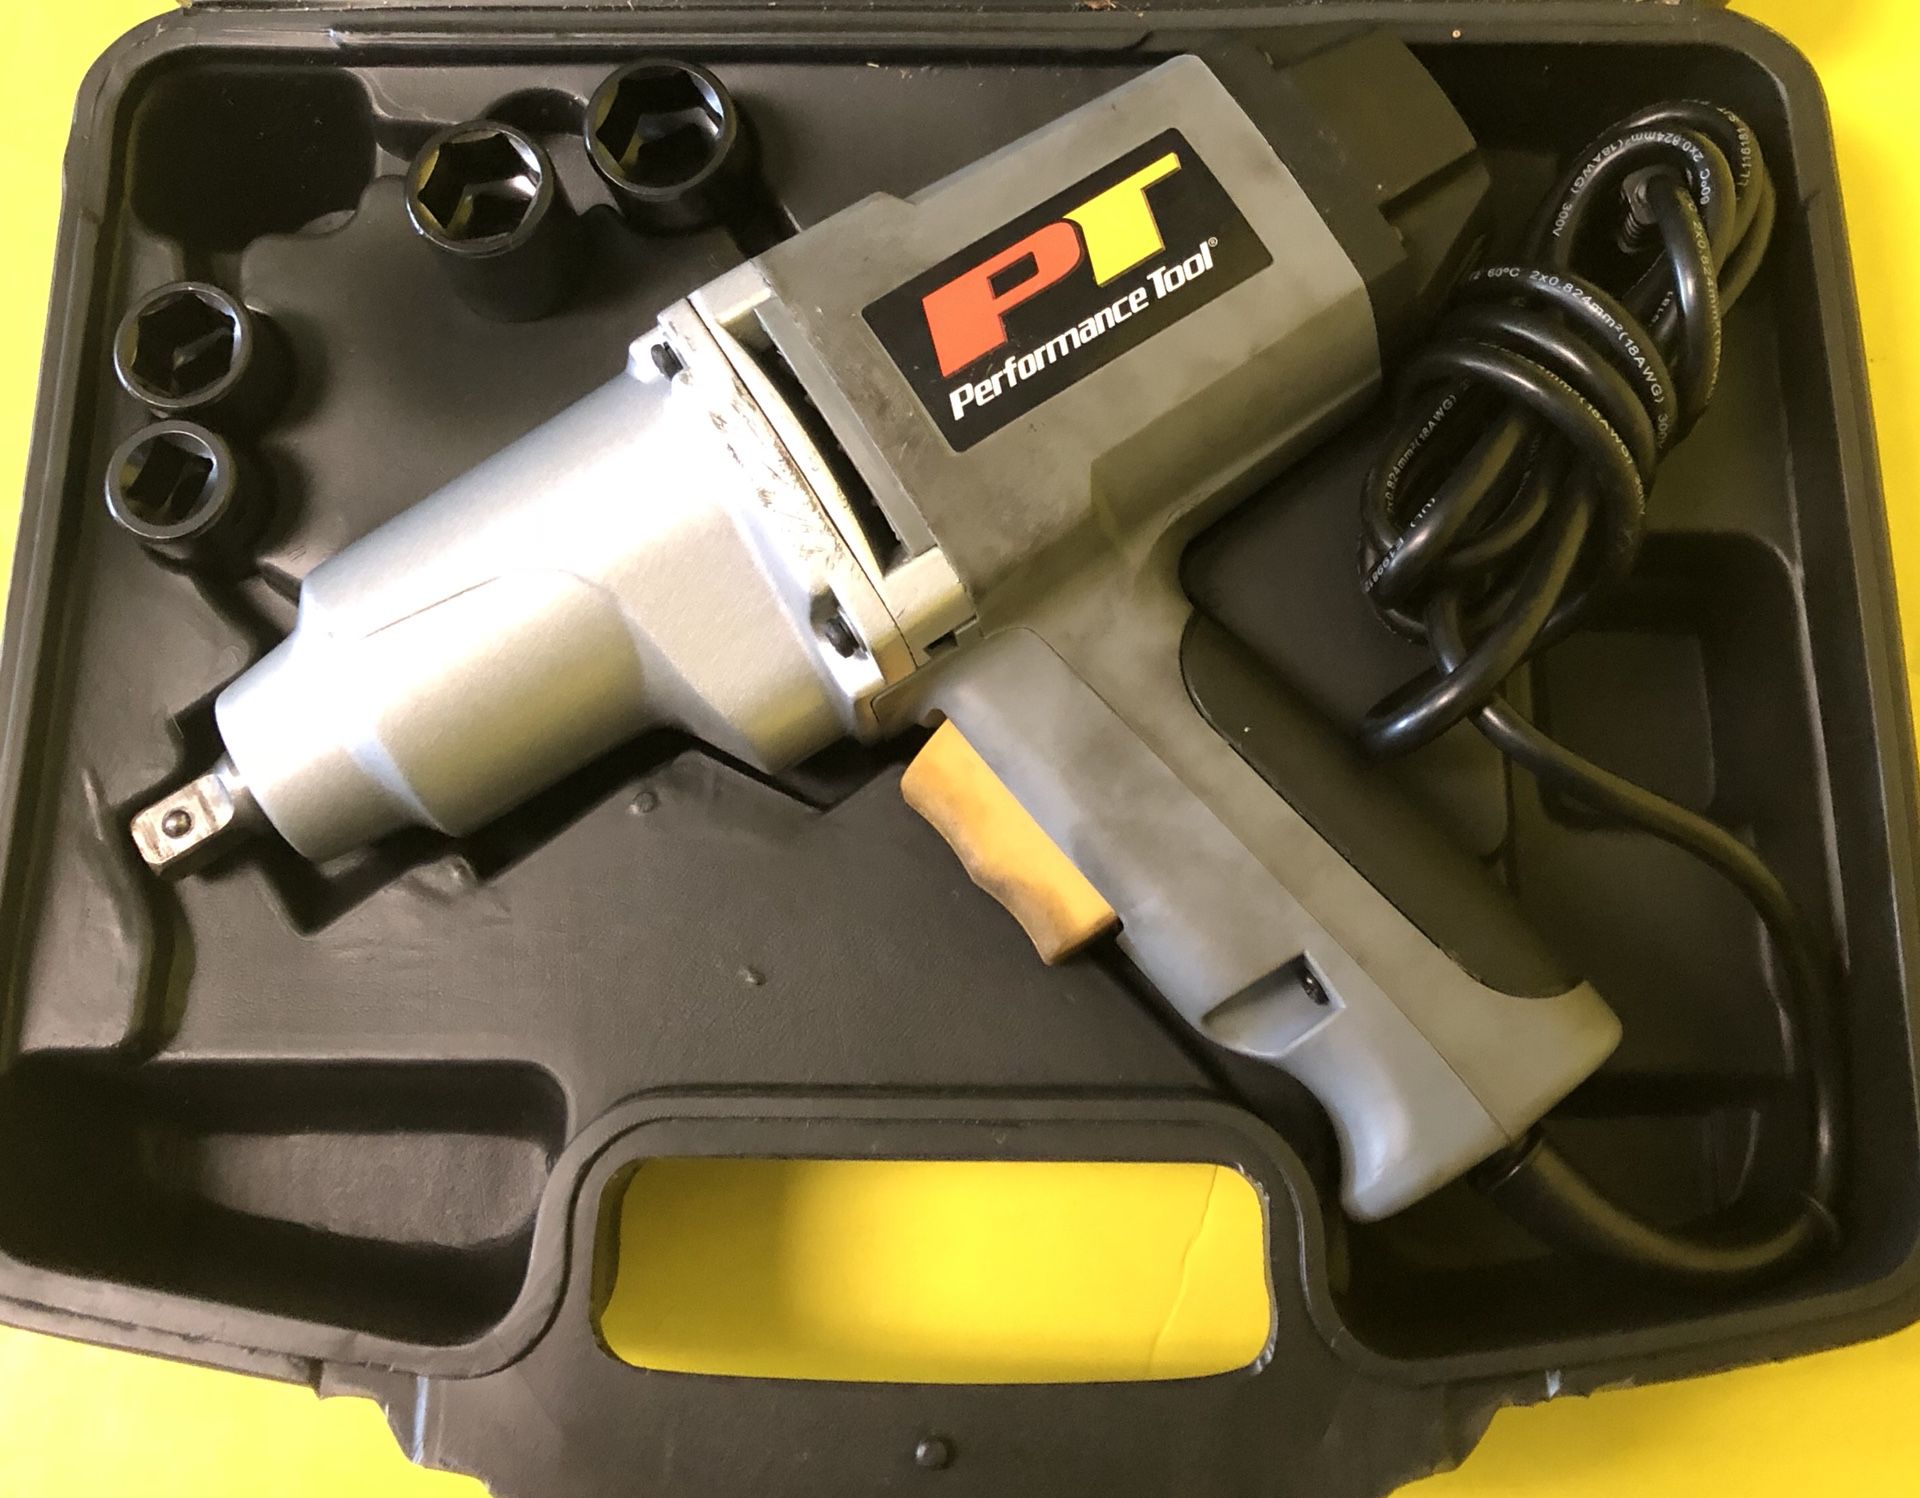 Performance Tool W50080 - 1/2 I Drive and 110V Impact Wrench - GOOD CONDITION